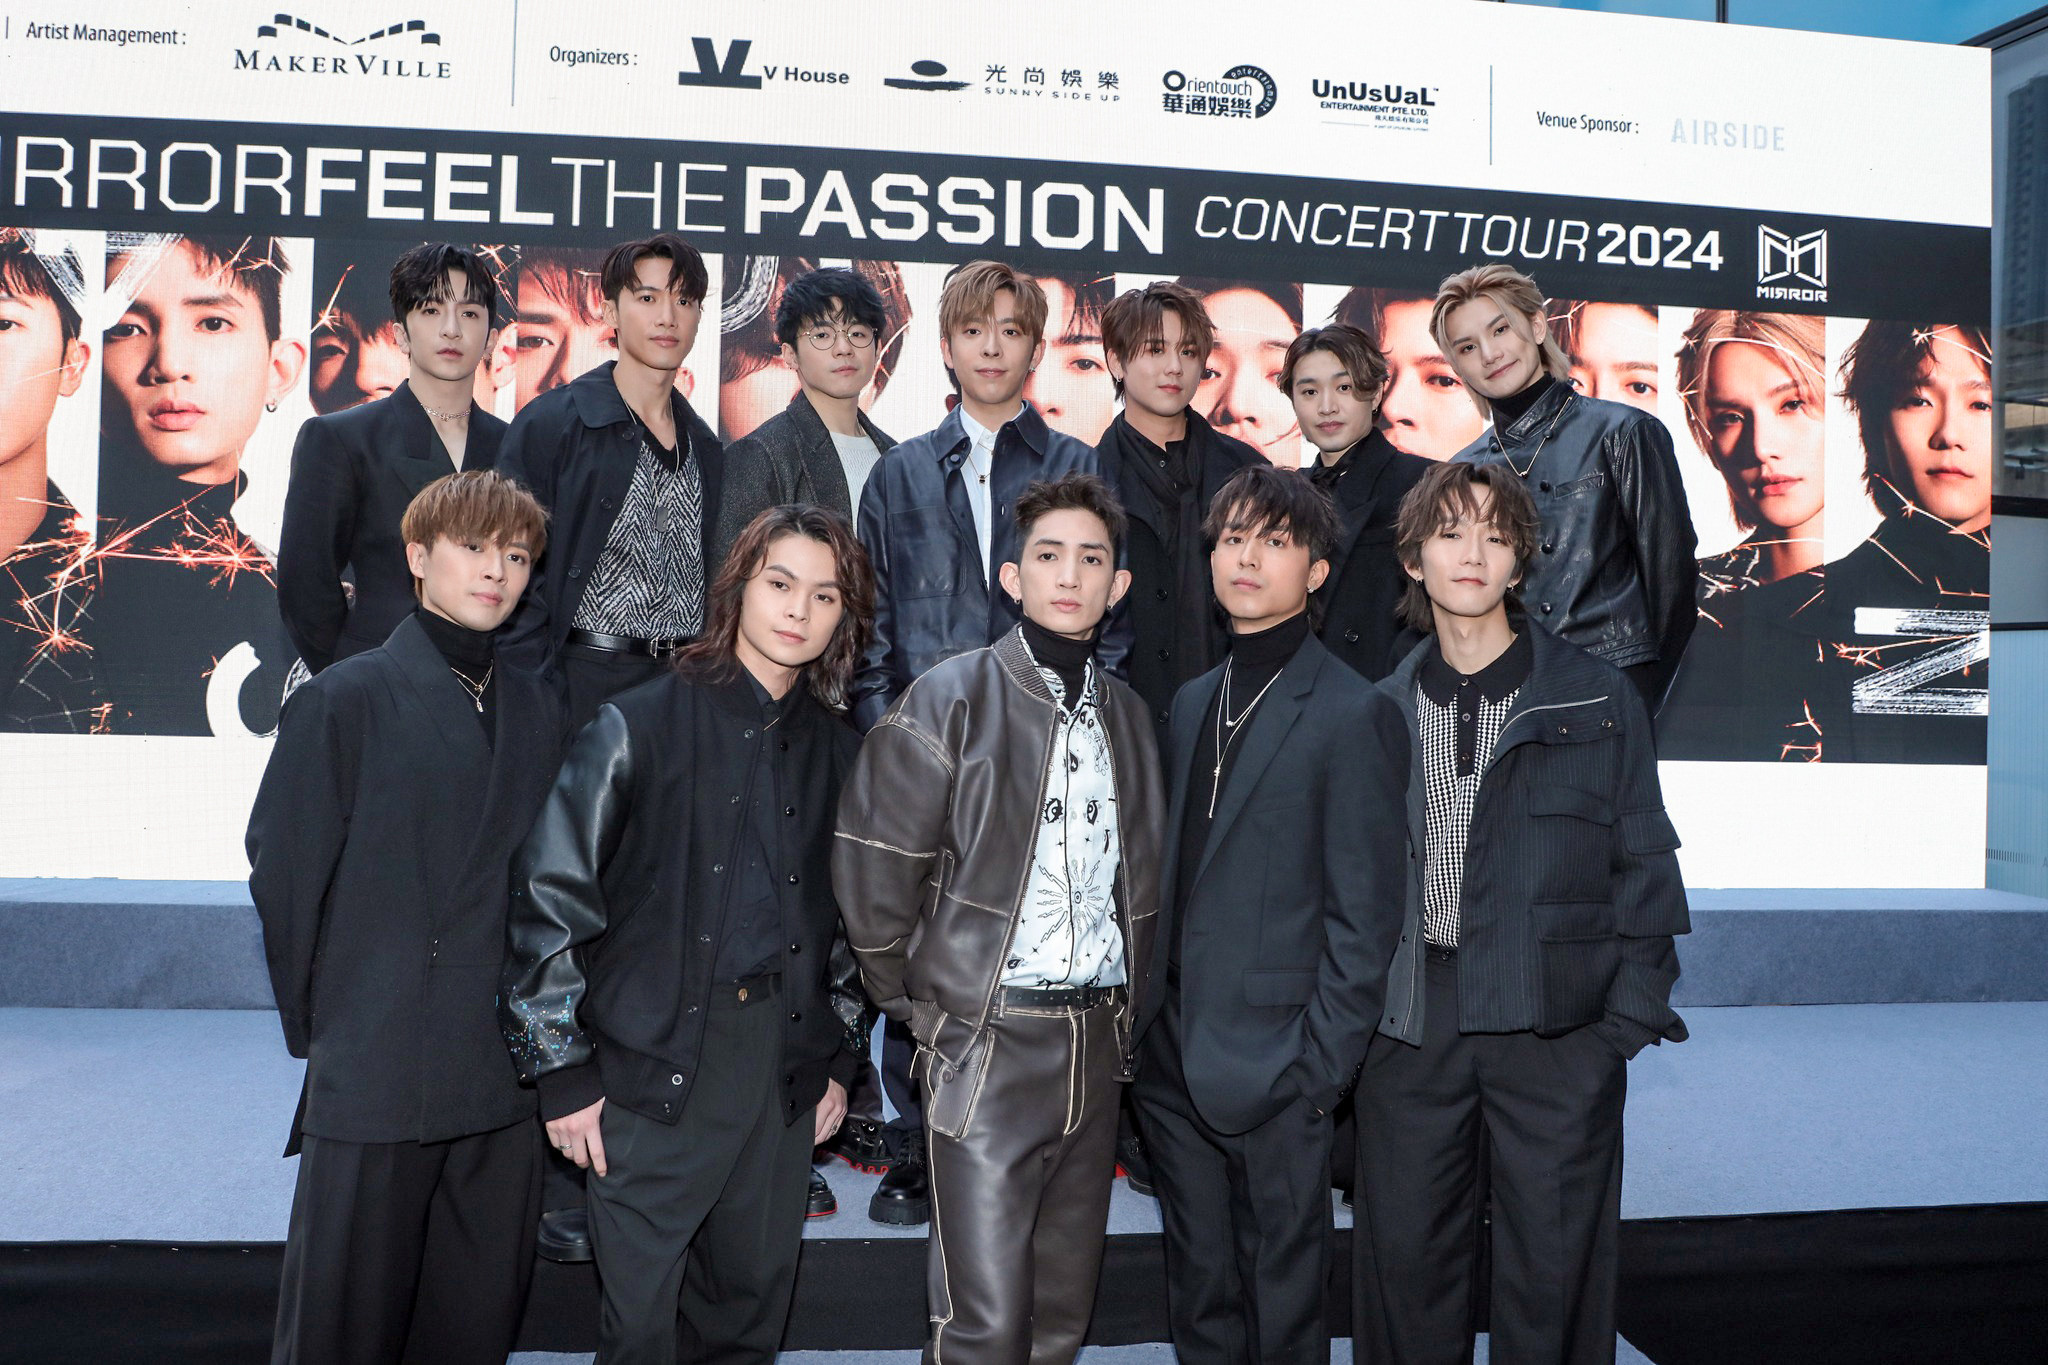 The popular 12-member boy band kicks off its comeback concert series with 16 sold-out performances from January 15 to February 3 at the Asia-World Expo. Photo: MakerVille